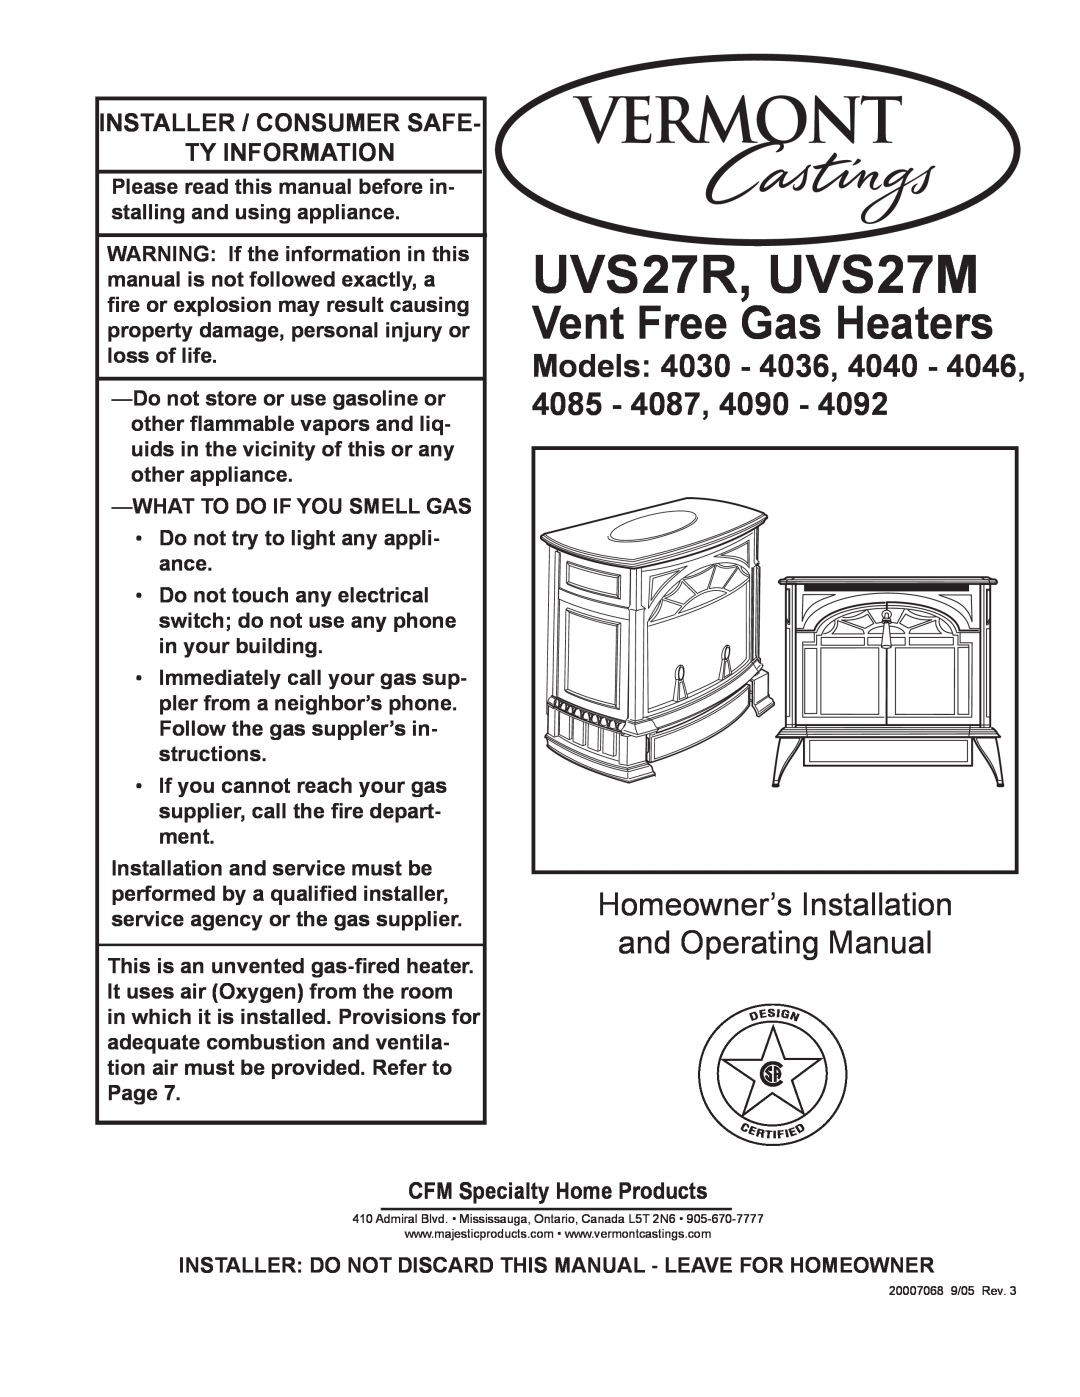 Vermont Casting 4040 - 4046 manual Models, 4085, Installer / Consumer Safe Ty Information, CFM Specialty Home Products 